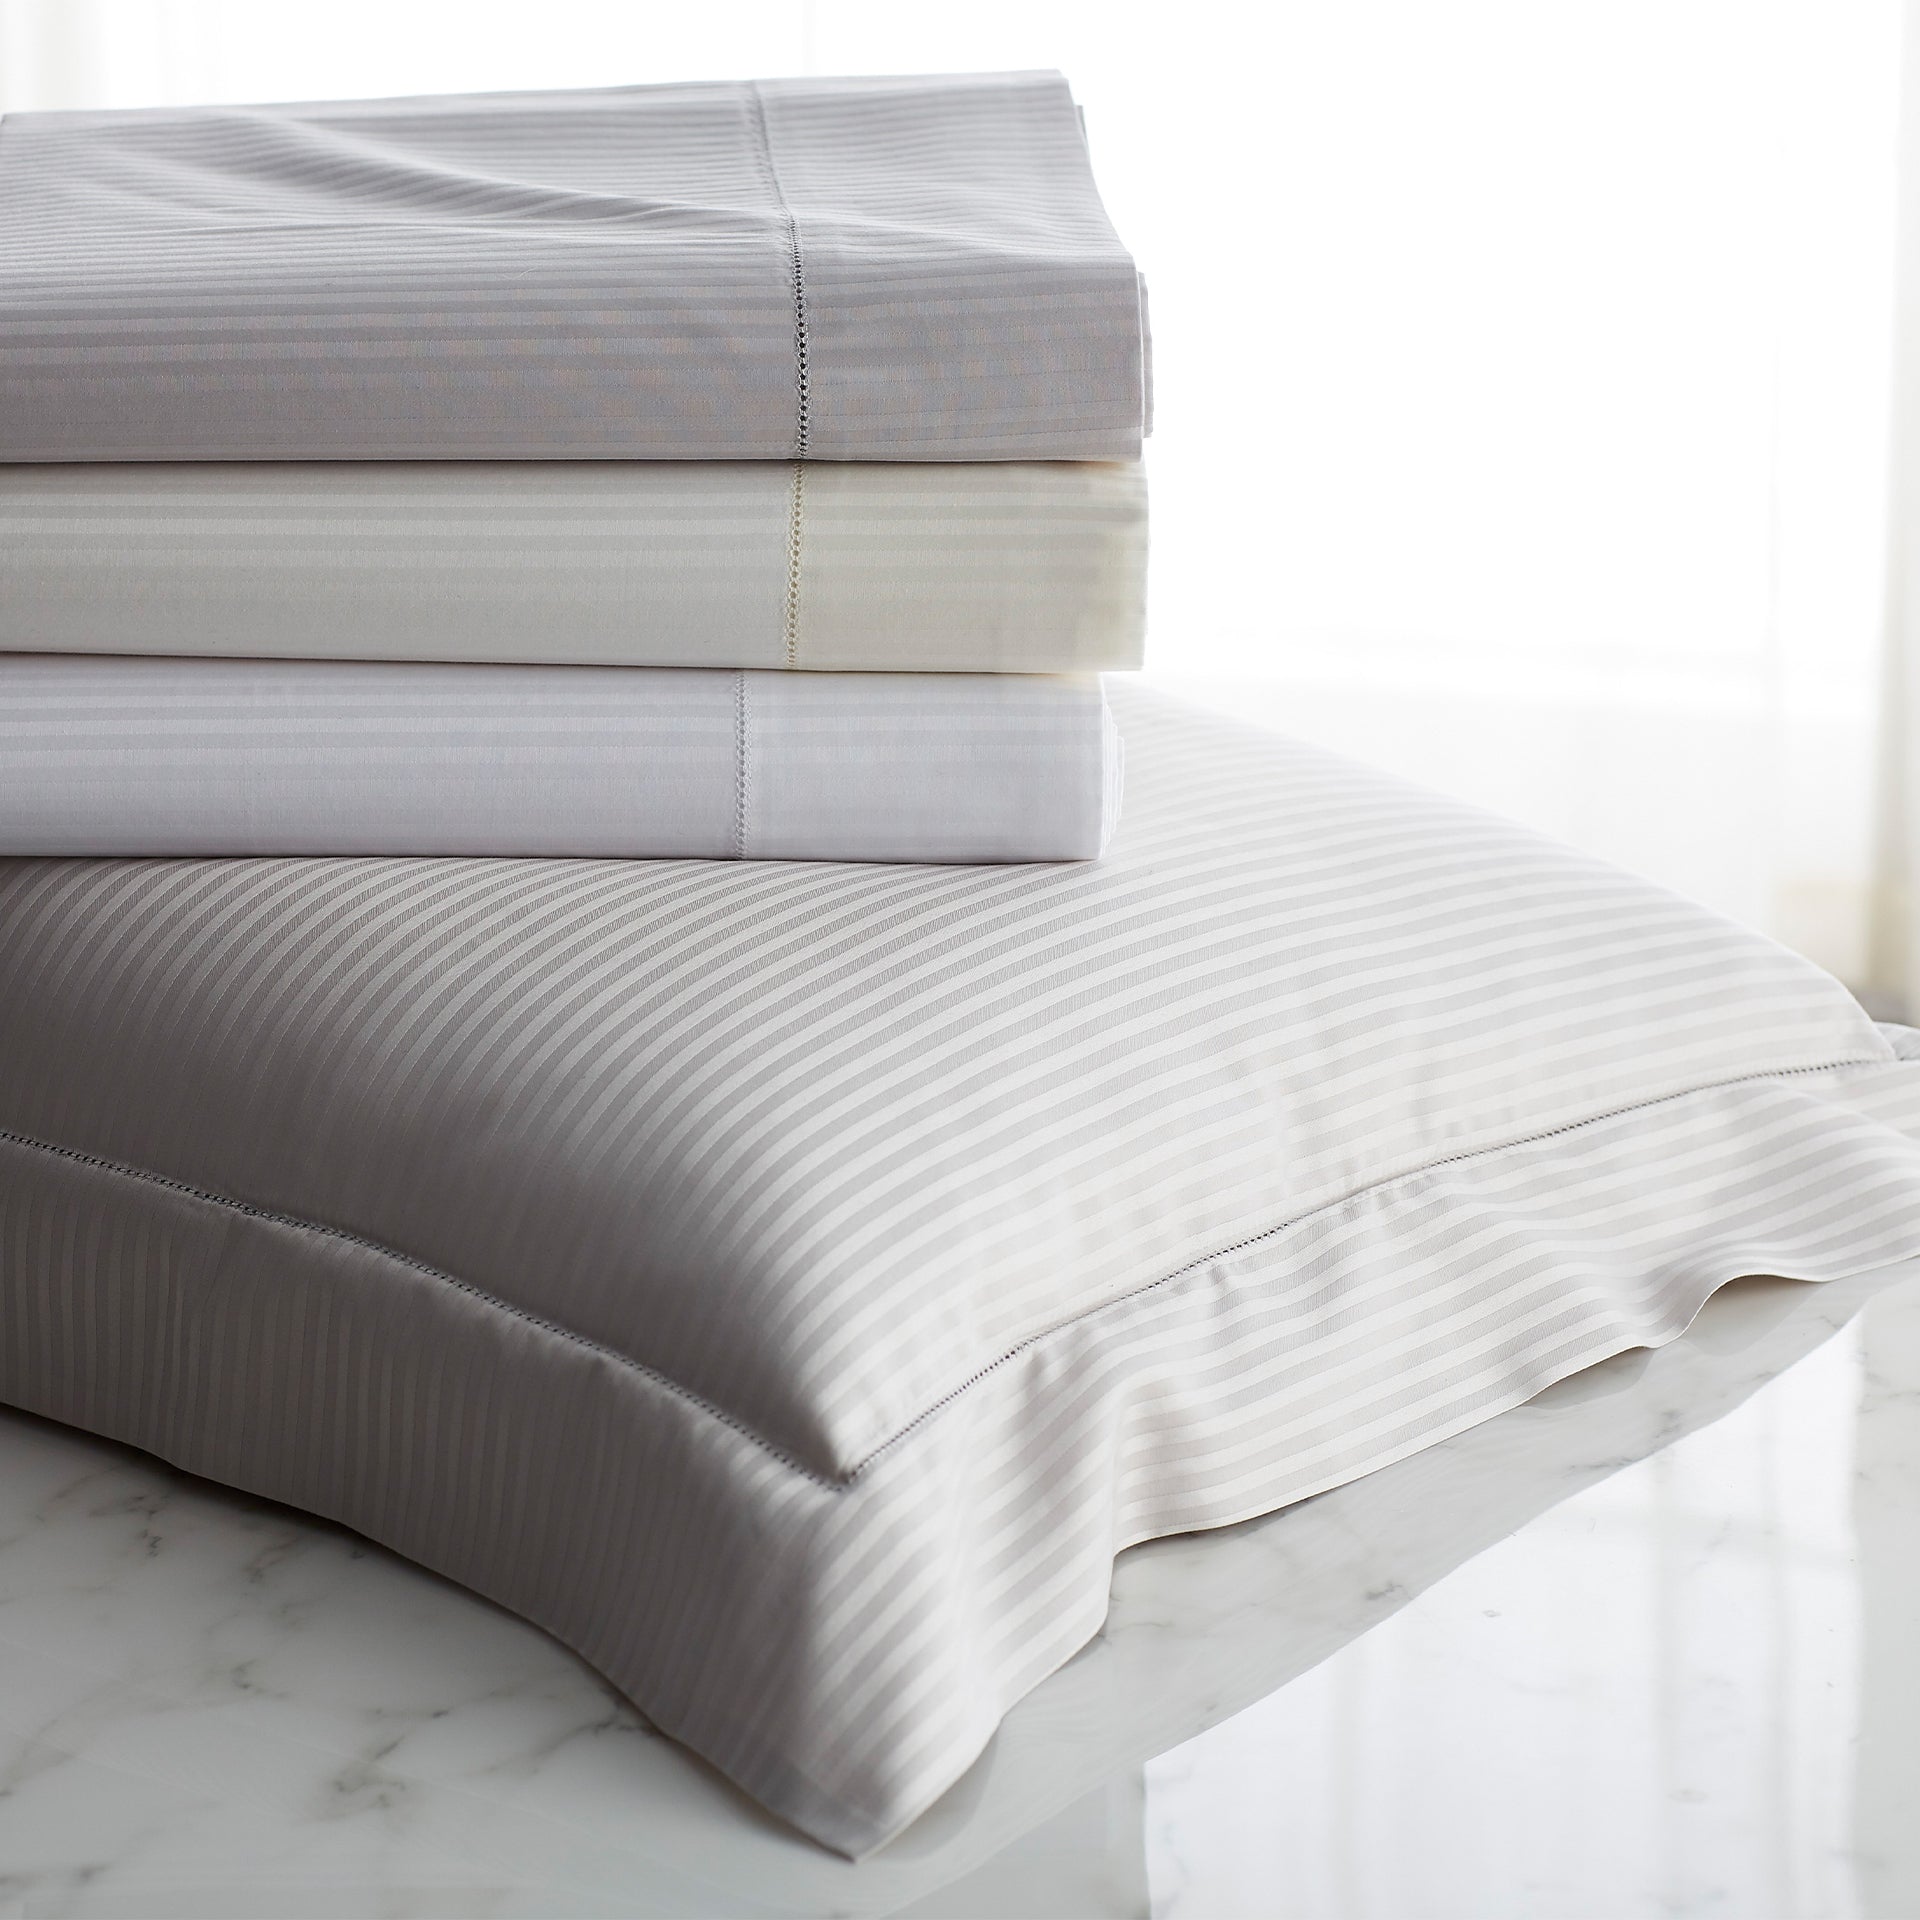 savoia flat sheets folded showing all available color ways-white, ivory, and shadow 